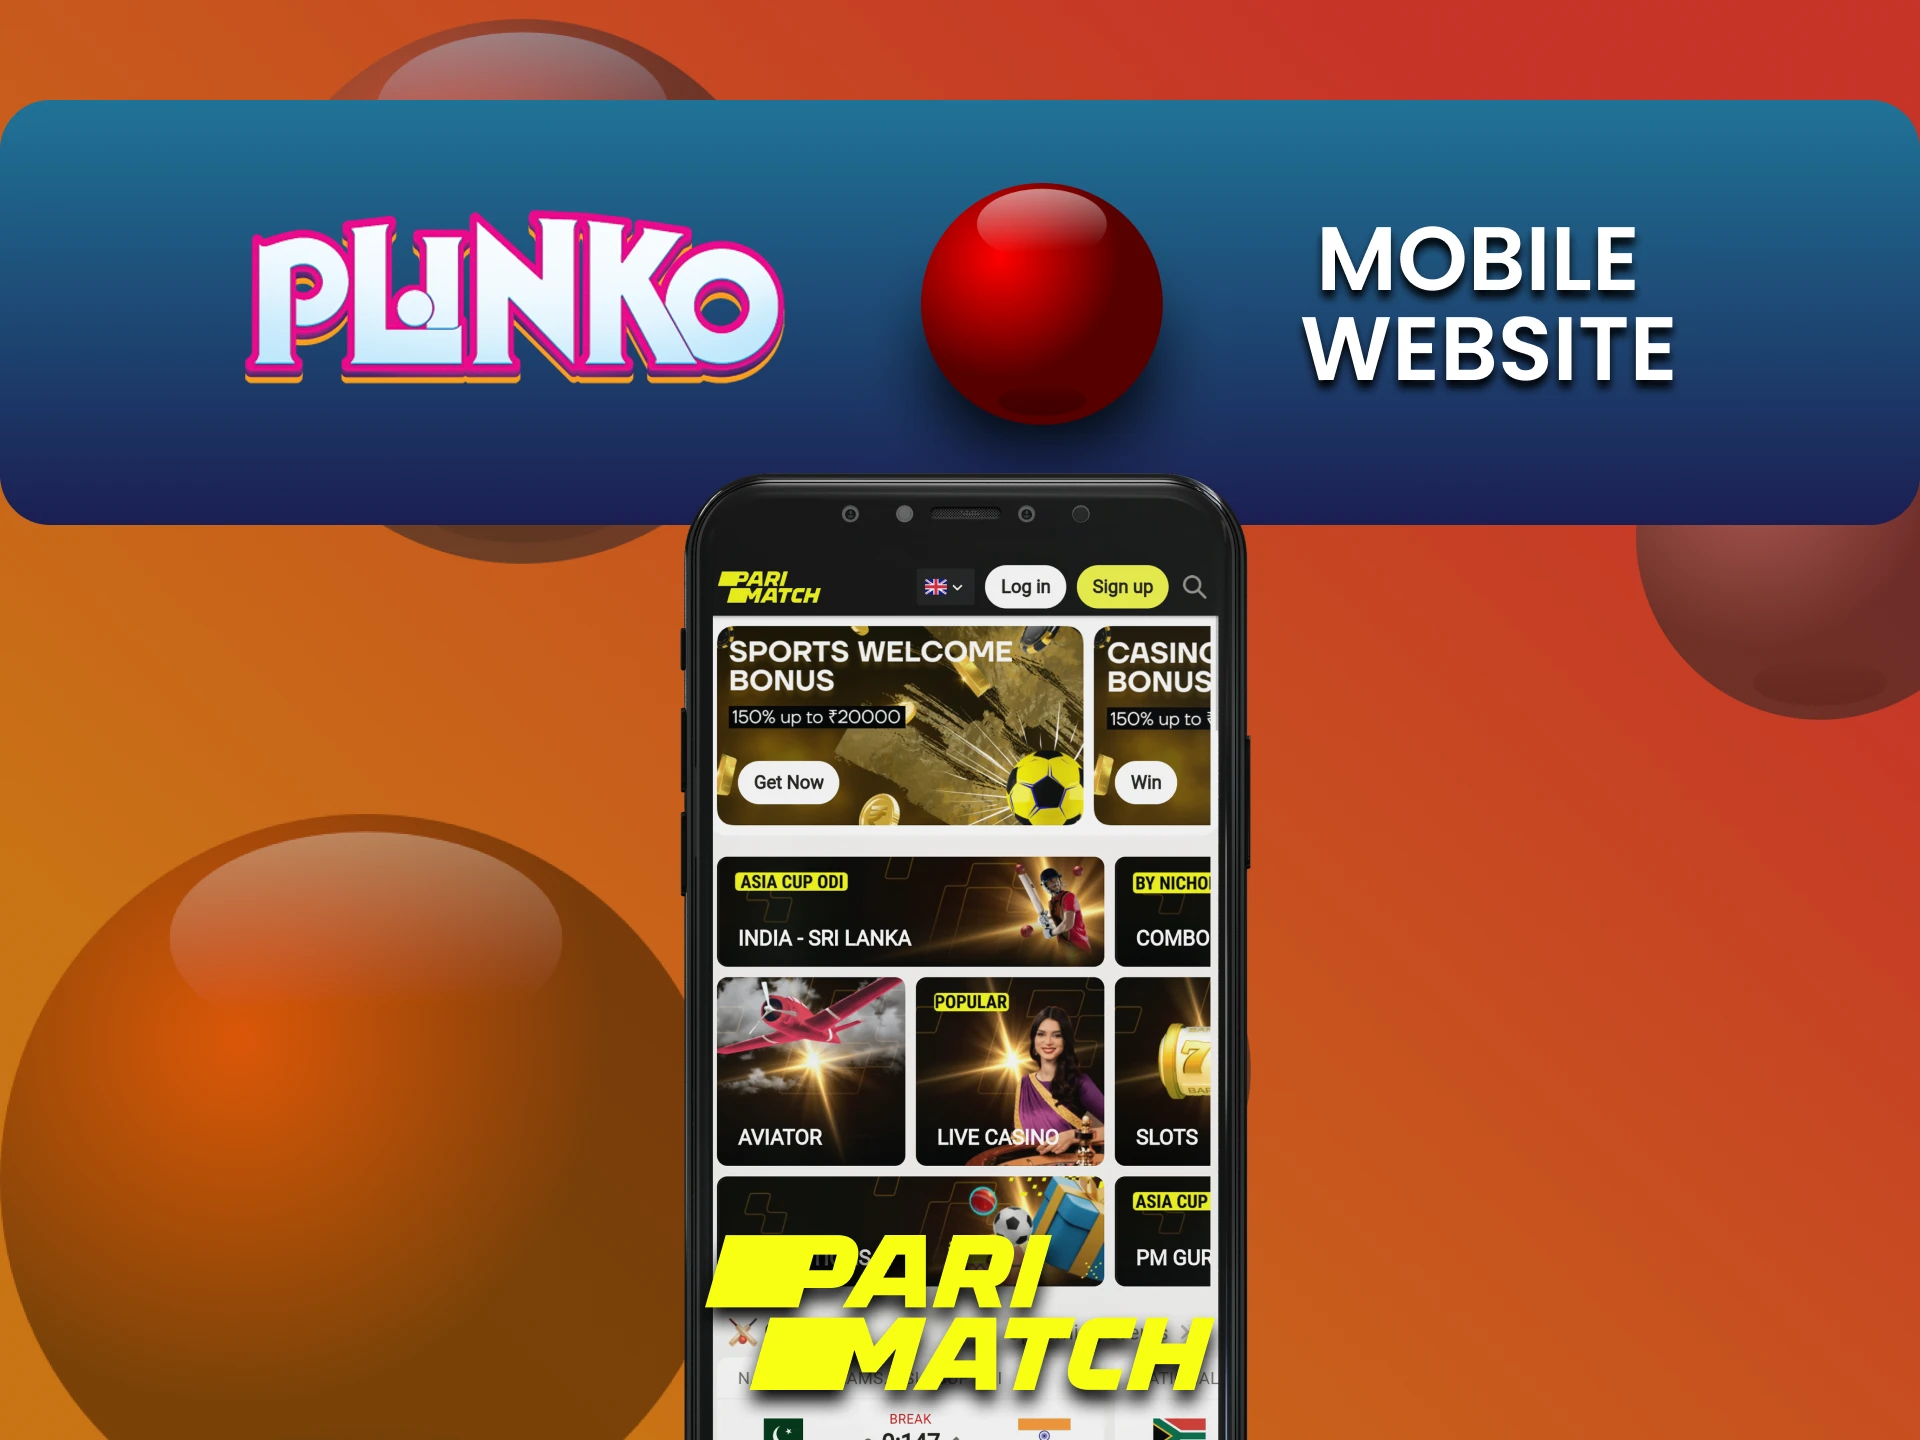 Visit the mobile version of the Parimatch website to play Plinko.